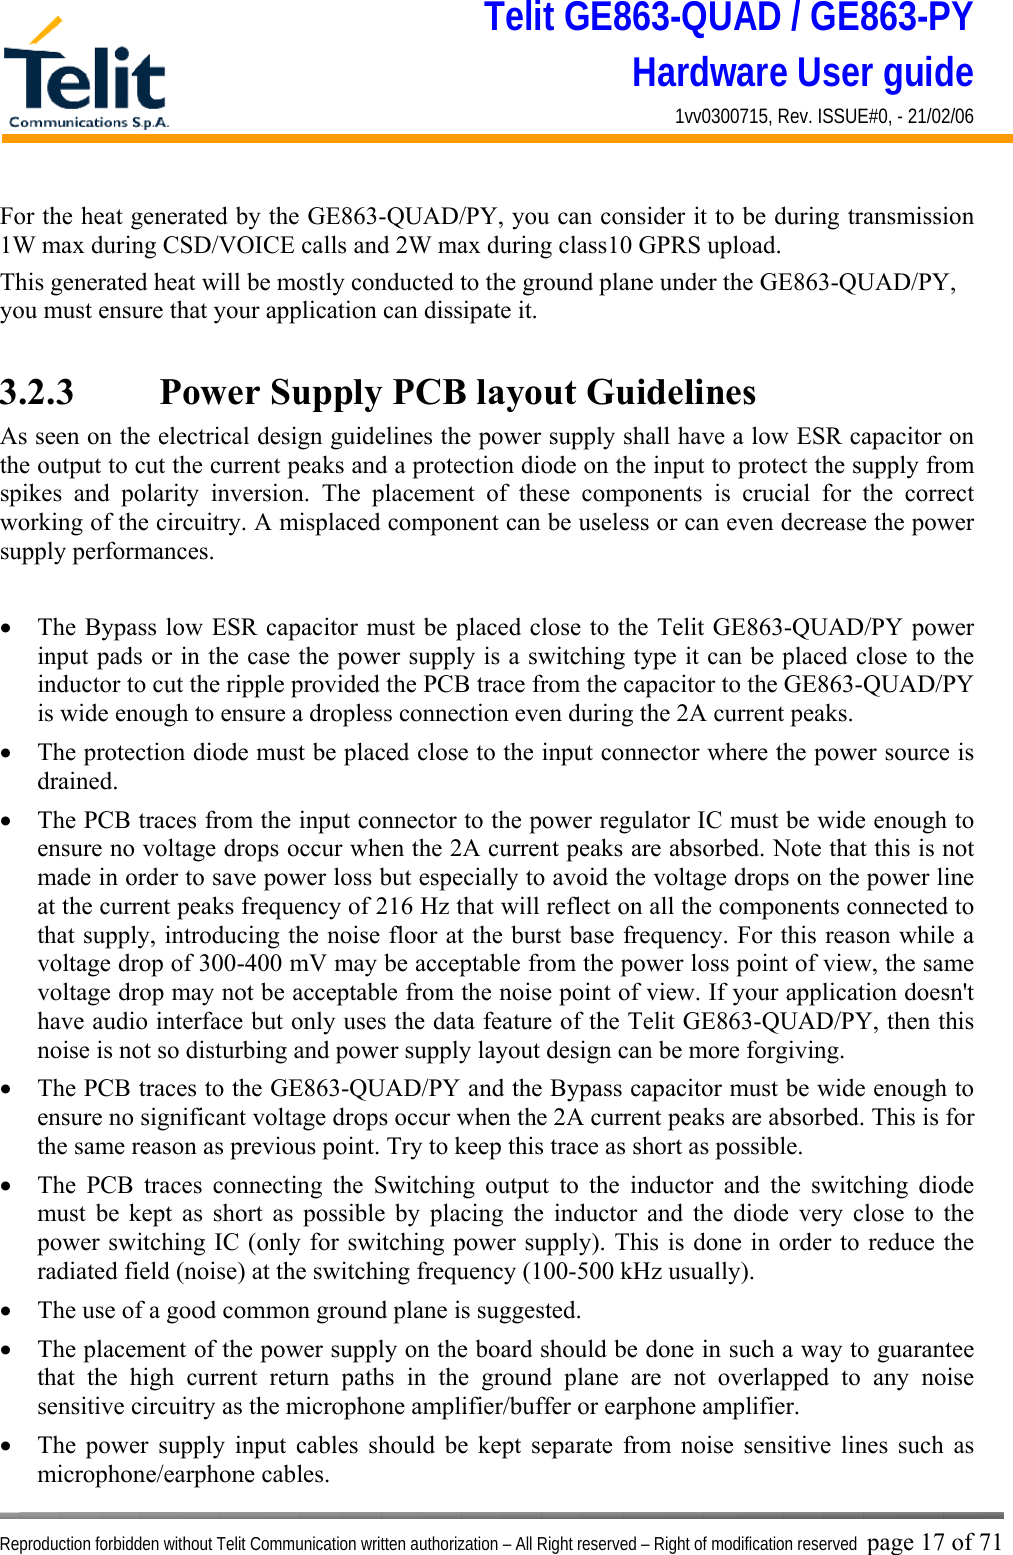 Telit GE863-QUAD / GE863-PY Hardware User guide 1vv0300715, Rev. ISSUE#0, - 21/02/06    Reproduction forbidden without Telit Communication written authorization – All Right reserved – Right of modification reserved page 17 of 71 For the heat generated by the GE863-QUAD/PY, you can consider it to be during transmission 1W max during CSD/VOICE calls and 2W max during class10 GPRS upload.  This generated heat will be mostly conducted to the ground plane under the GE863-QUAD/PY, you must ensure that your application can dissipate it.  3.2.3    Power Supply PCB layout Guidelines As seen on the electrical design guidelines the power supply shall have a low ESR capacitor on the output to cut the current peaks and a protection diode on the input to protect the supply from spikes and polarity inversion. The placement of these components is crucial for the correct working of the circuitry. A misplaced component can be useless or can even decrease the power supply performances.  •  The Bypass low ESR capacitor must be placed close to the Telit GE863-QUAD/PY power input pads or in the case the power supply is a switching type it can be placed close to the inductor to cut the ripple provided the PCB trace from the capacitor to the GE863-QUAD/PY is wide enough to ensure a dropless connection even during the 2A current peaks. •  The protection diode must be placed close to the input connector where the power source is drained. •  The PCB traces from the input connector to the power regulator IC must be wide enough to ensure no voltage drops occur when the 2A current peaks are absorbed. Note that this is not made in order to save power loss but especially to avoid the voltage drops on the power line at the current peaks frequency of 216 Hz that will reflect on all the components connected to that supply, introducing the noise floor at the burst base frequency. For this reason while a voltage drop of 300-400 mV may be acceptable from the power loss point of view, the same voltage drop may not be acceptable from the noise point of view. If your application doesn&apos;t have audio interface but only uses the data feature of the Telit GE863-QUAD/PY, then this noise is not so disturbing and power supply layout design can be more forgiving. •  The PCB traces to the GE863-QUAD/PY and the Bypass capacitor must be wide enough to ensure no significant voltage drops occur when the 2A current peaks are absorbed. This is for the same reason as previous point. Try to keep this trace as short as possible. •  The PCB traces connecting the Switching output to the inductor and the switching diode must be kept as short as possible by placing the inductor and the diode very close to the power switching IC (only for switching power supply). This is done in order to reduce the radiated field (noise) at the switching frequency (100-500 kHz usually). •  The use of a good common ground plane is suggested. •  The placement of the power supply on the board should be done in such a way to guarantee that the high current return paths in the ground plane are not overlapped to any noise sensitive circuitry as the microphone amplifier/buffer or earphone amplifier. •  The power supply input cables should be kept separate from noise sensitive lines such as microphone/earphone cables. 